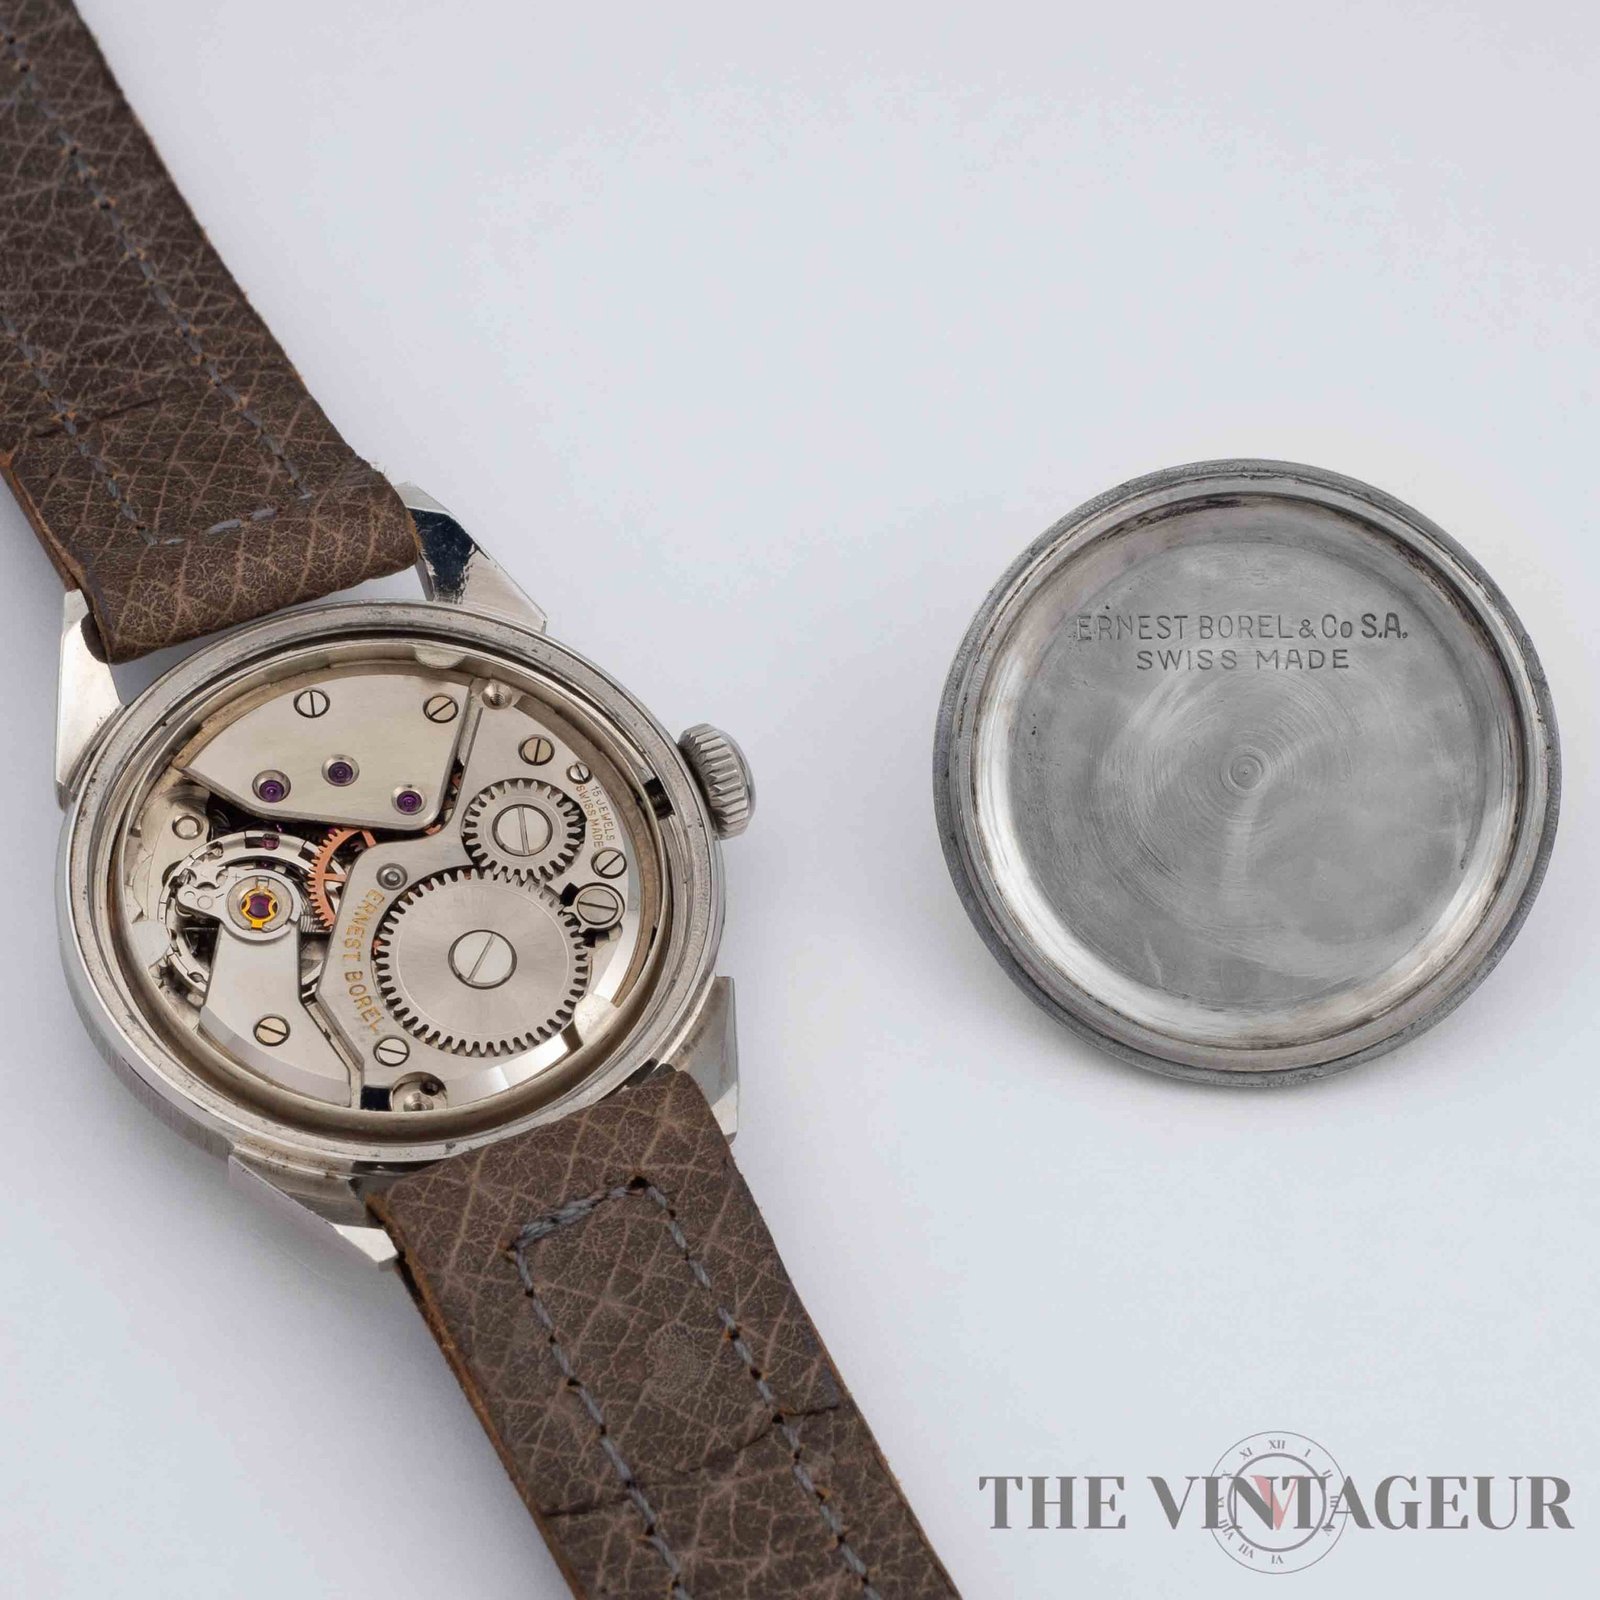 Ernest-Borel-The-Vintageur---Your-bespoke-watches-collection---Collectible-watches-and-more